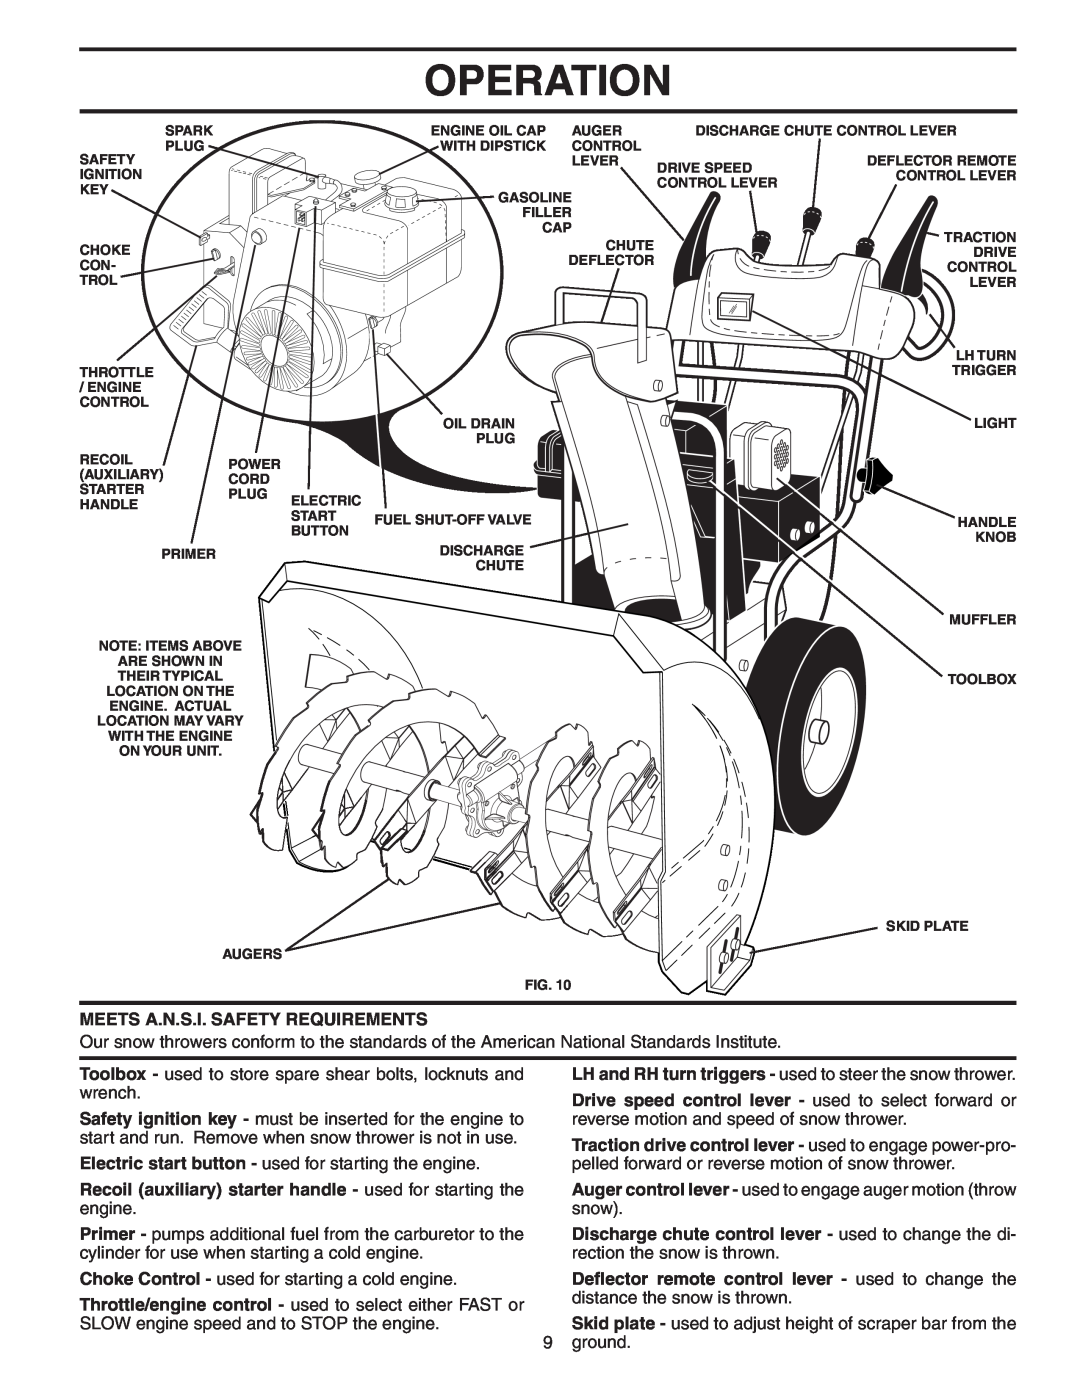 Husqvarna 9027ST owner manual Operation, Meets A.N.S.I. Safety Requirements 